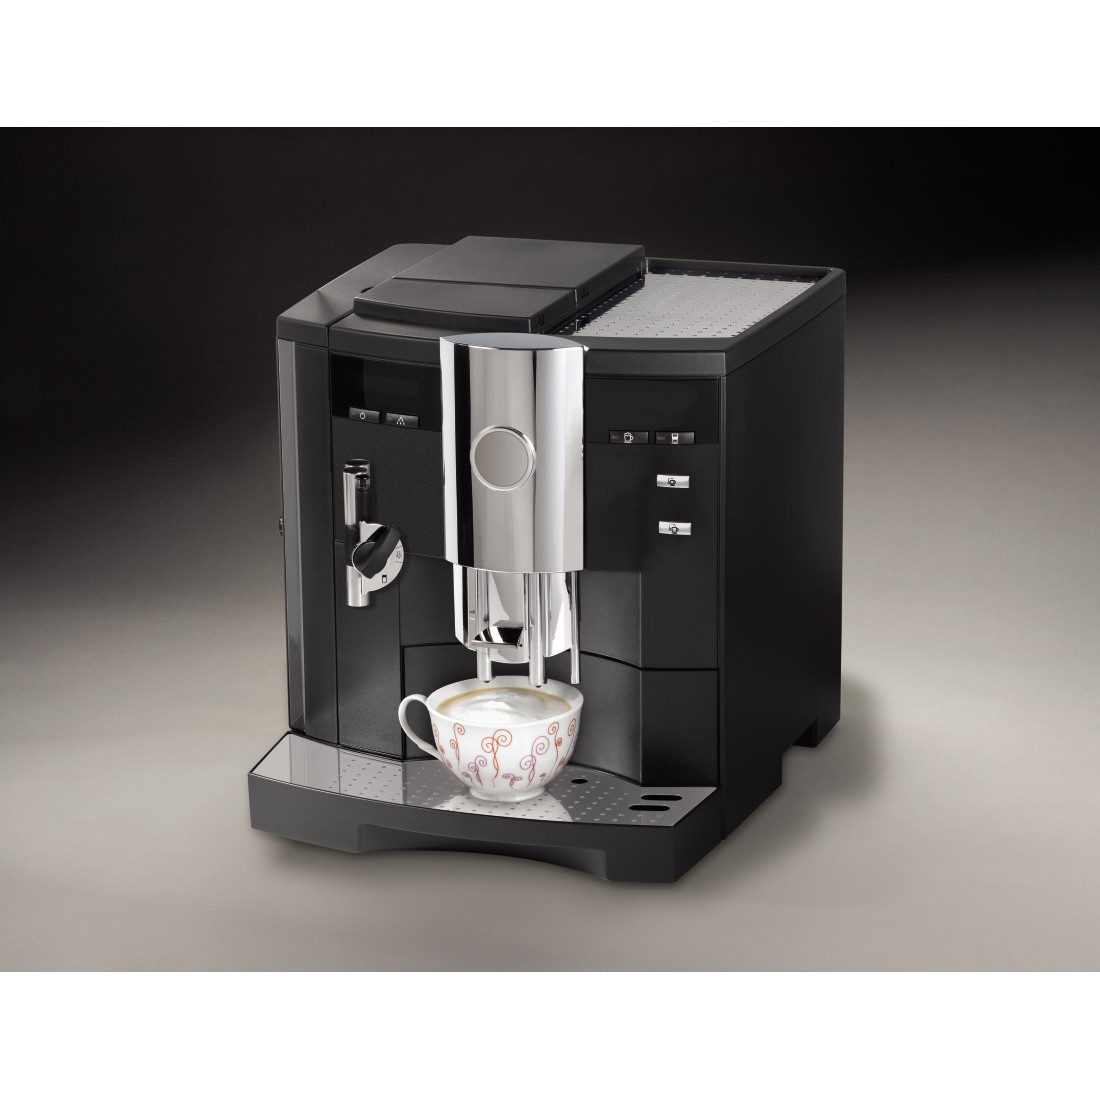 awx2 High-Res Appliance 2 - Xavax, Cleaner for Milk Froth Brewing Devices